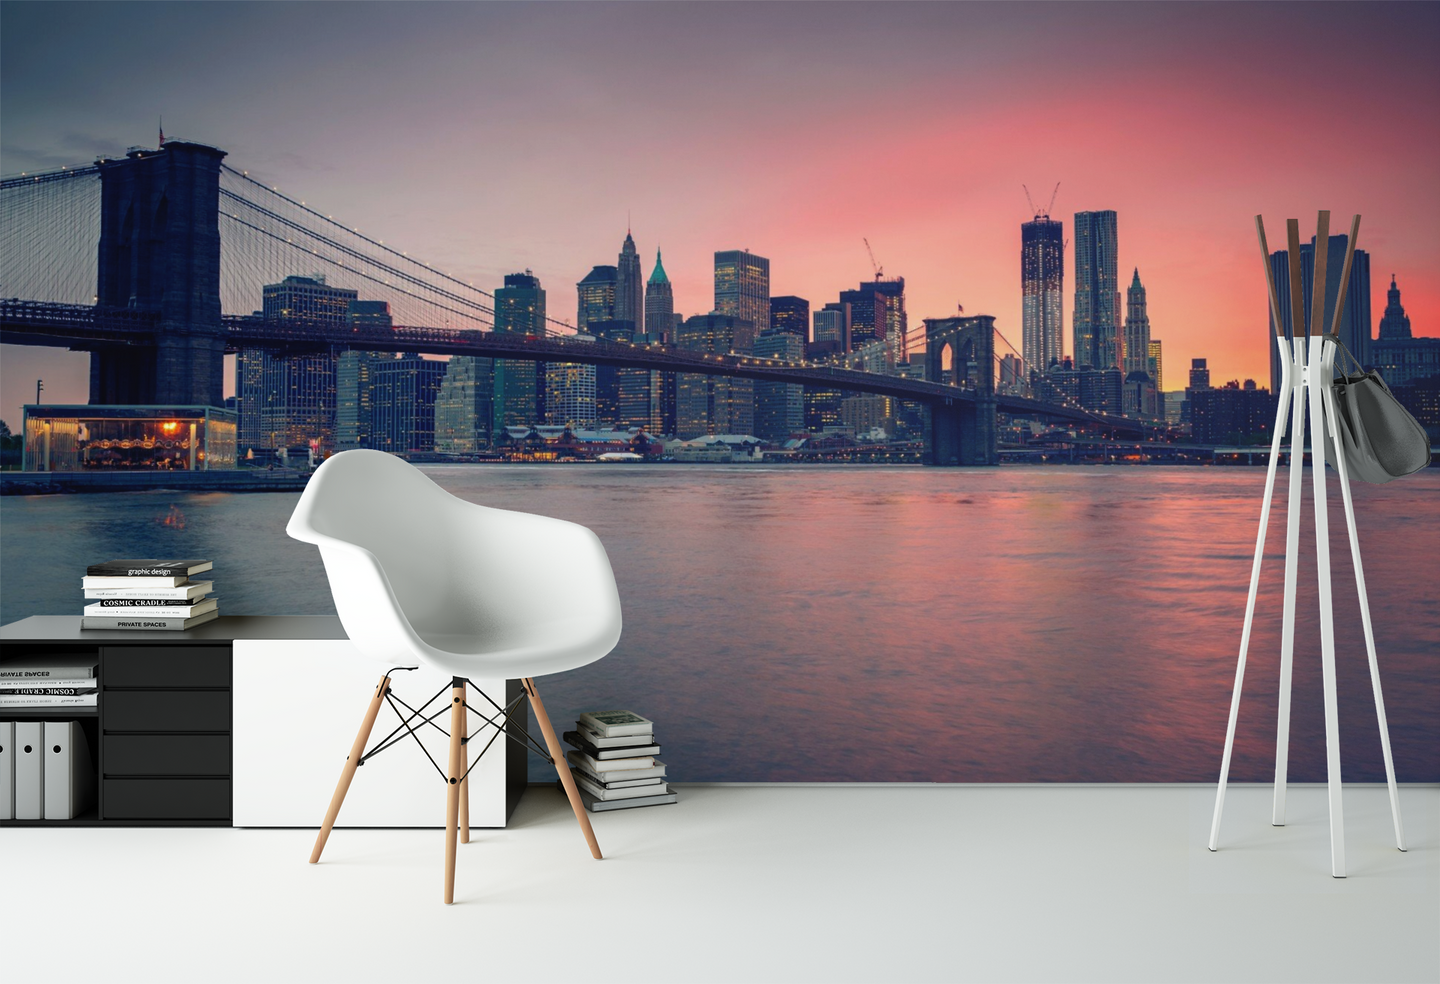 Sunset in the City - 013 - Wall Murals Printing - wall art